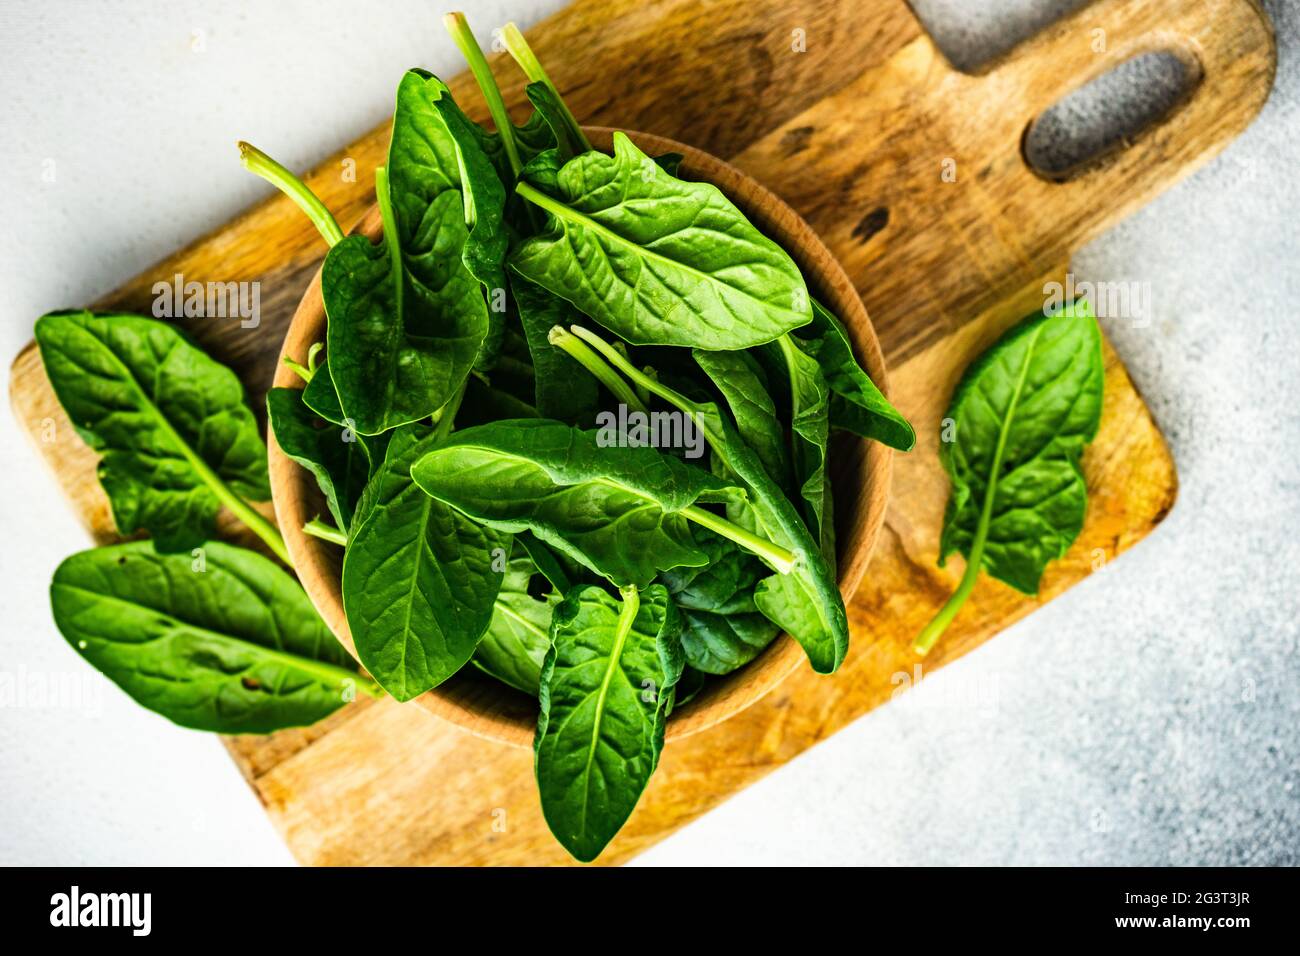 Organic food concept with fresh spinach Stock Photo